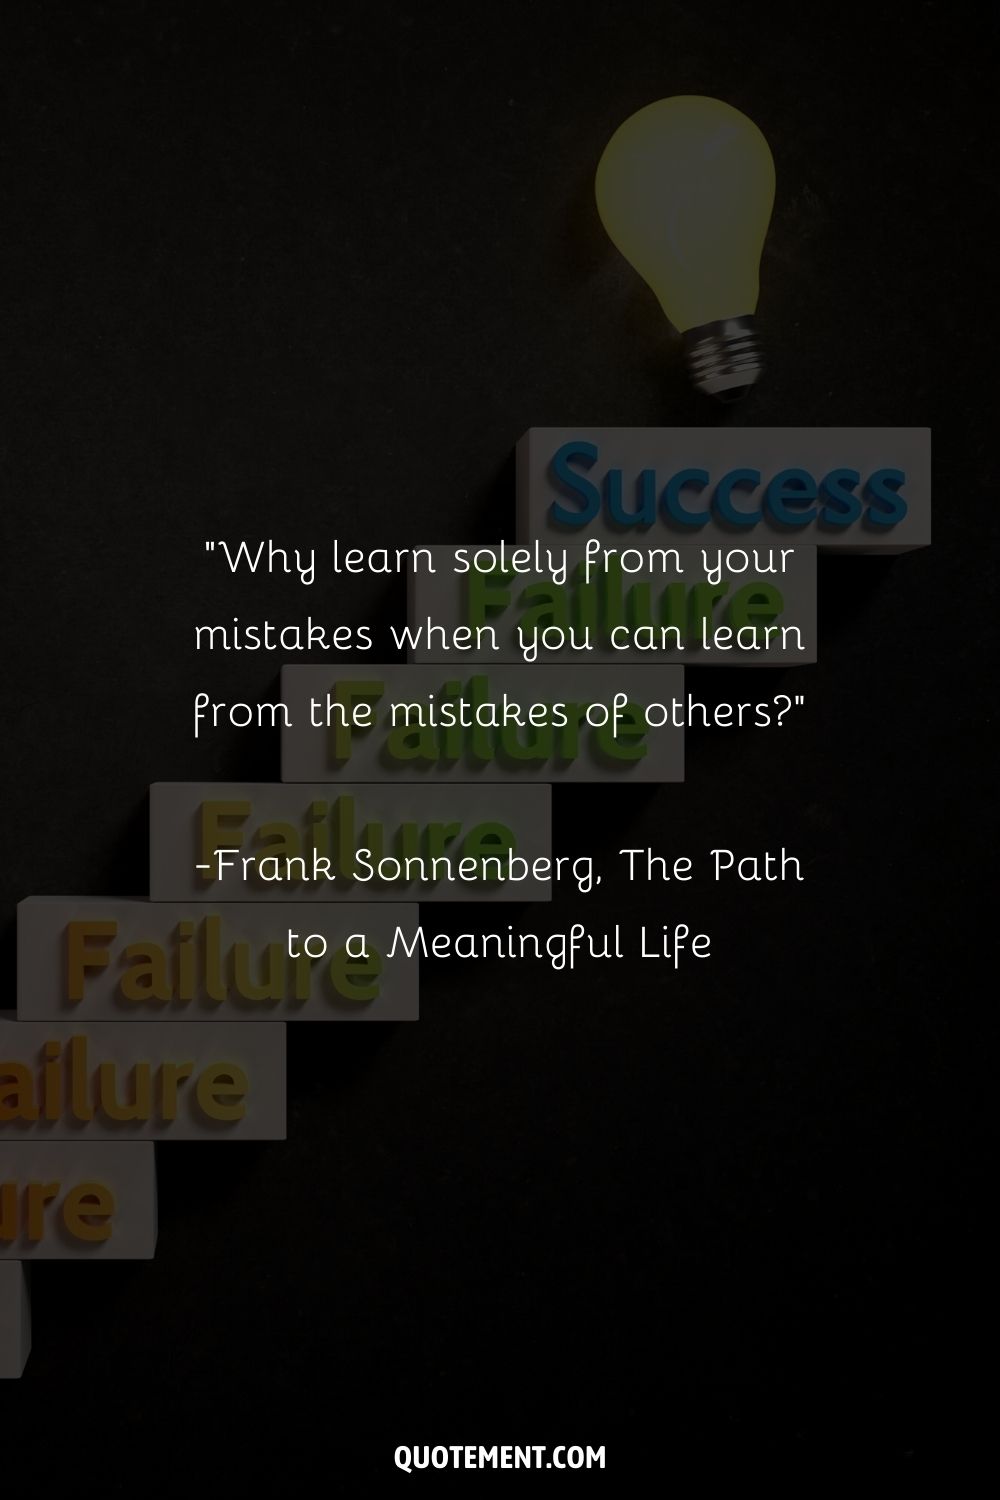 “Why learn solely from your mistakes when you can learn from the mistakes of others” ― Frank Sonnenberg, The Path to a Meaningful Life